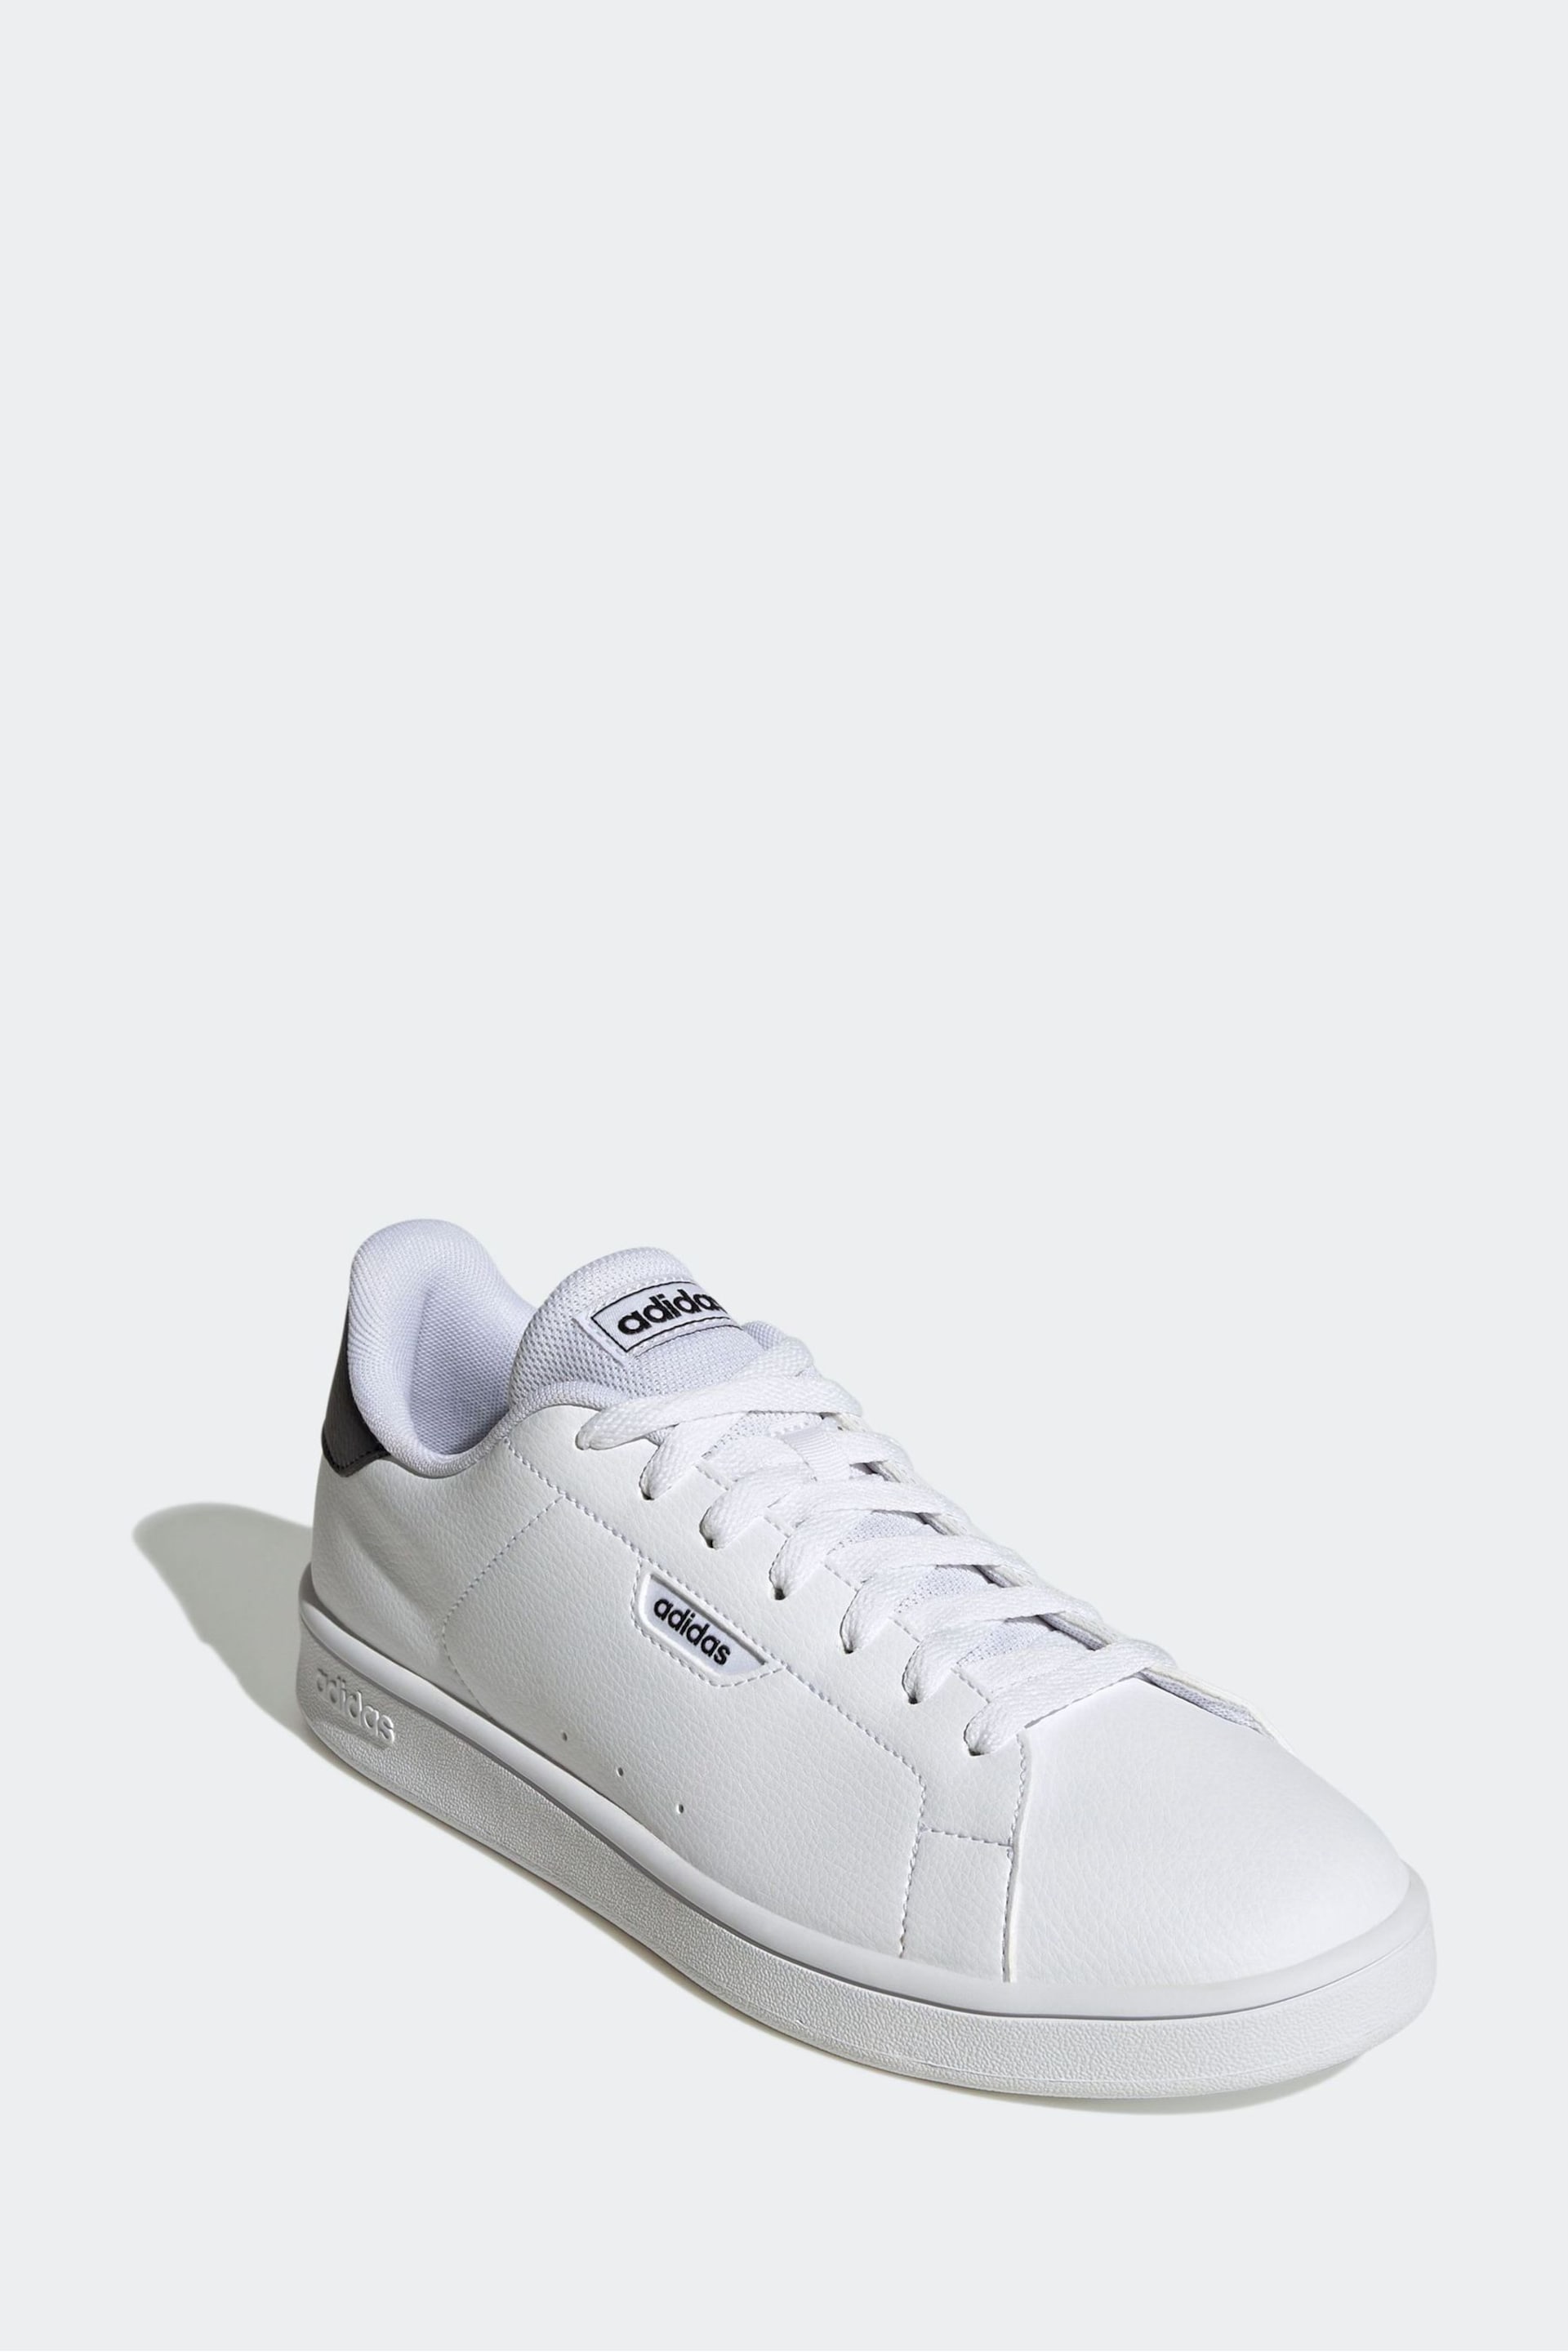 adidas White Urban Court Trainers - Image 3 of 8